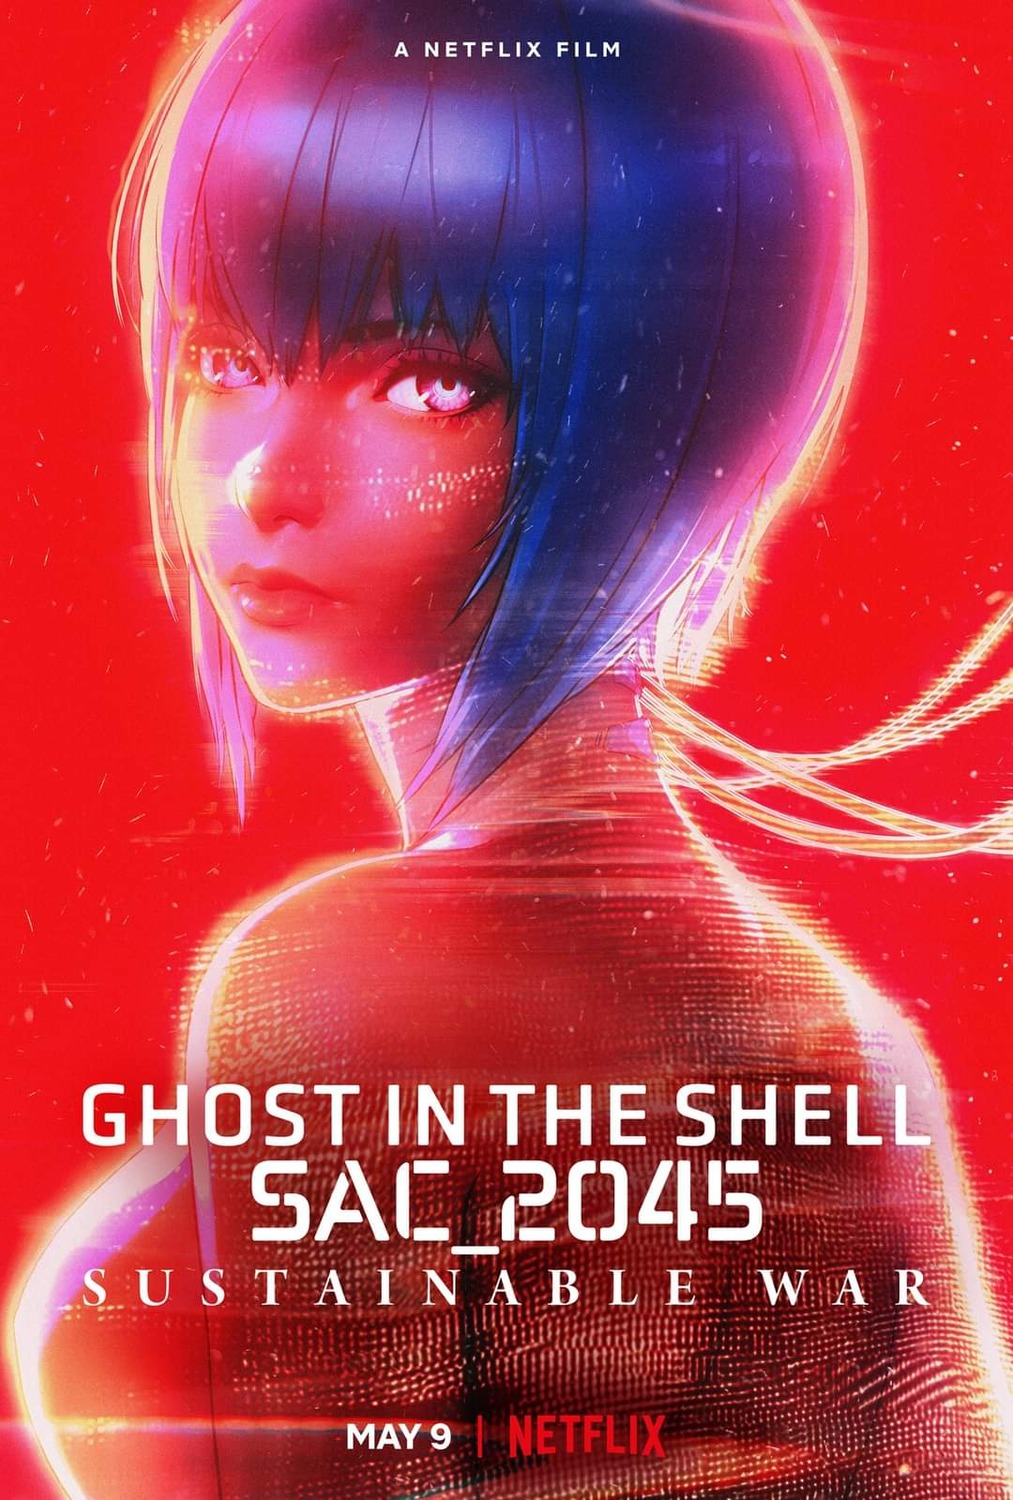 Extra Large Movie Poster Image for Ghost in the Shell: SAC_2045 - Sustainable Warfare (#2 of 2)